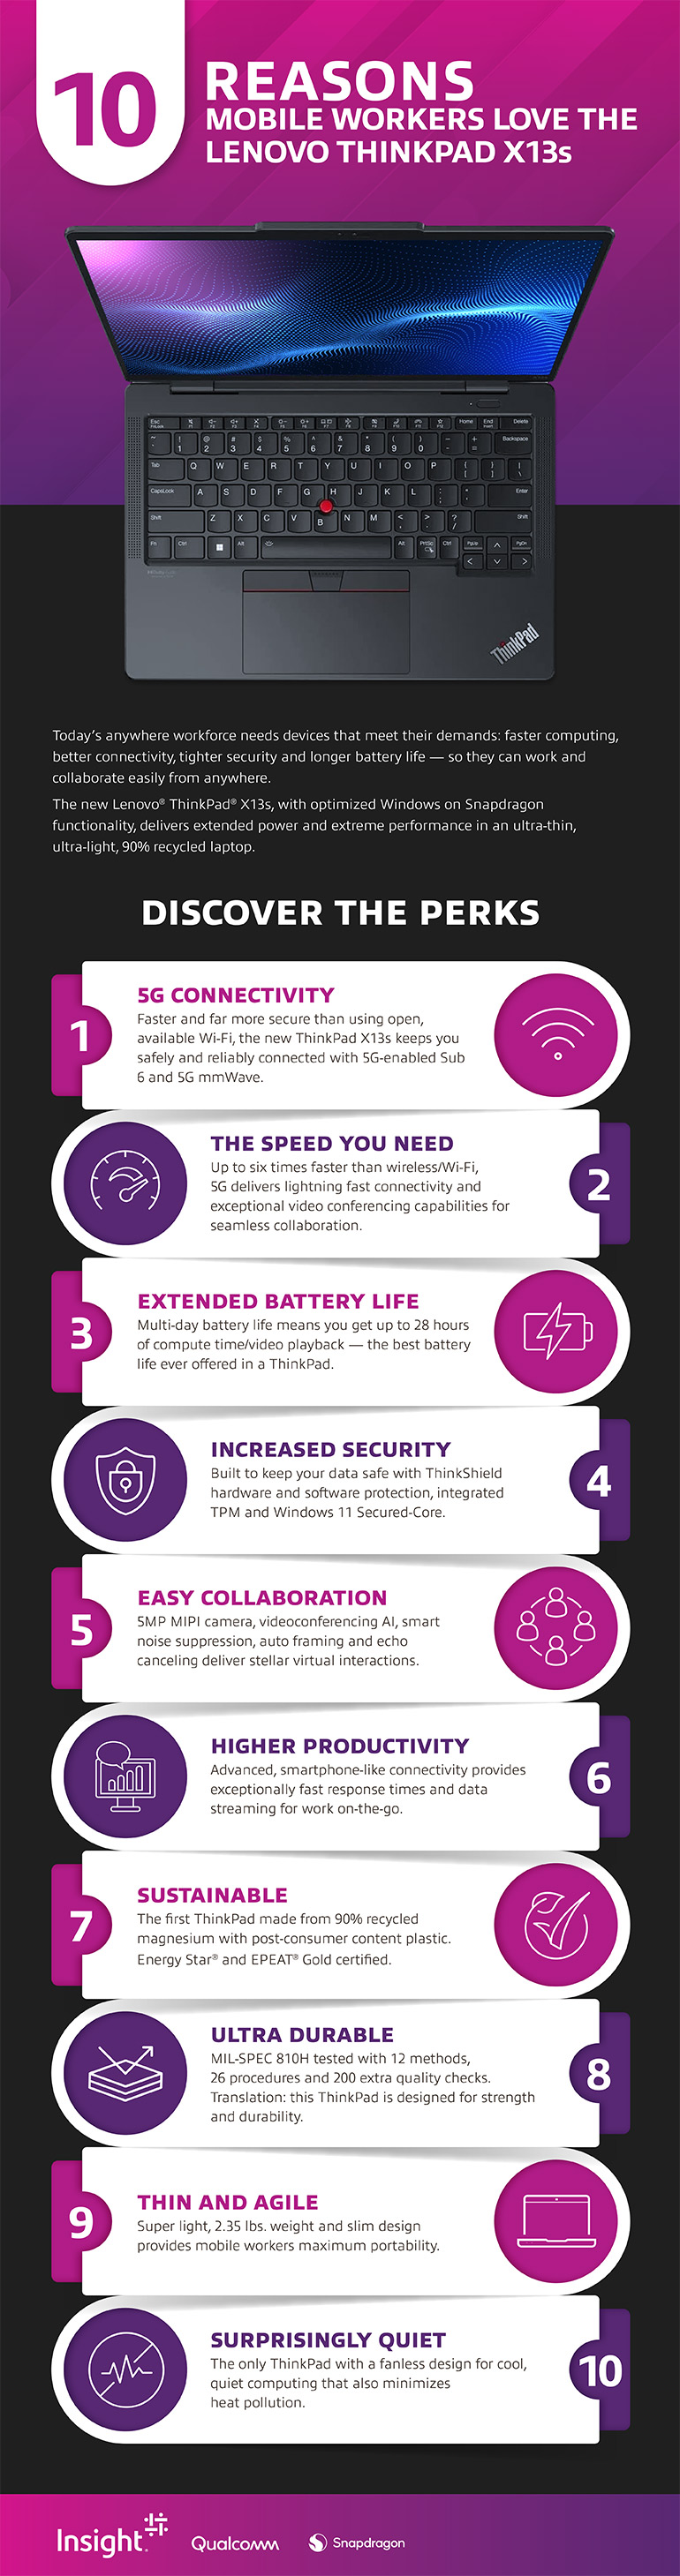 Lenovo 10 Reasons Mobile Workers Love the Lenovo ThinkPad X13s infographic as translated below.